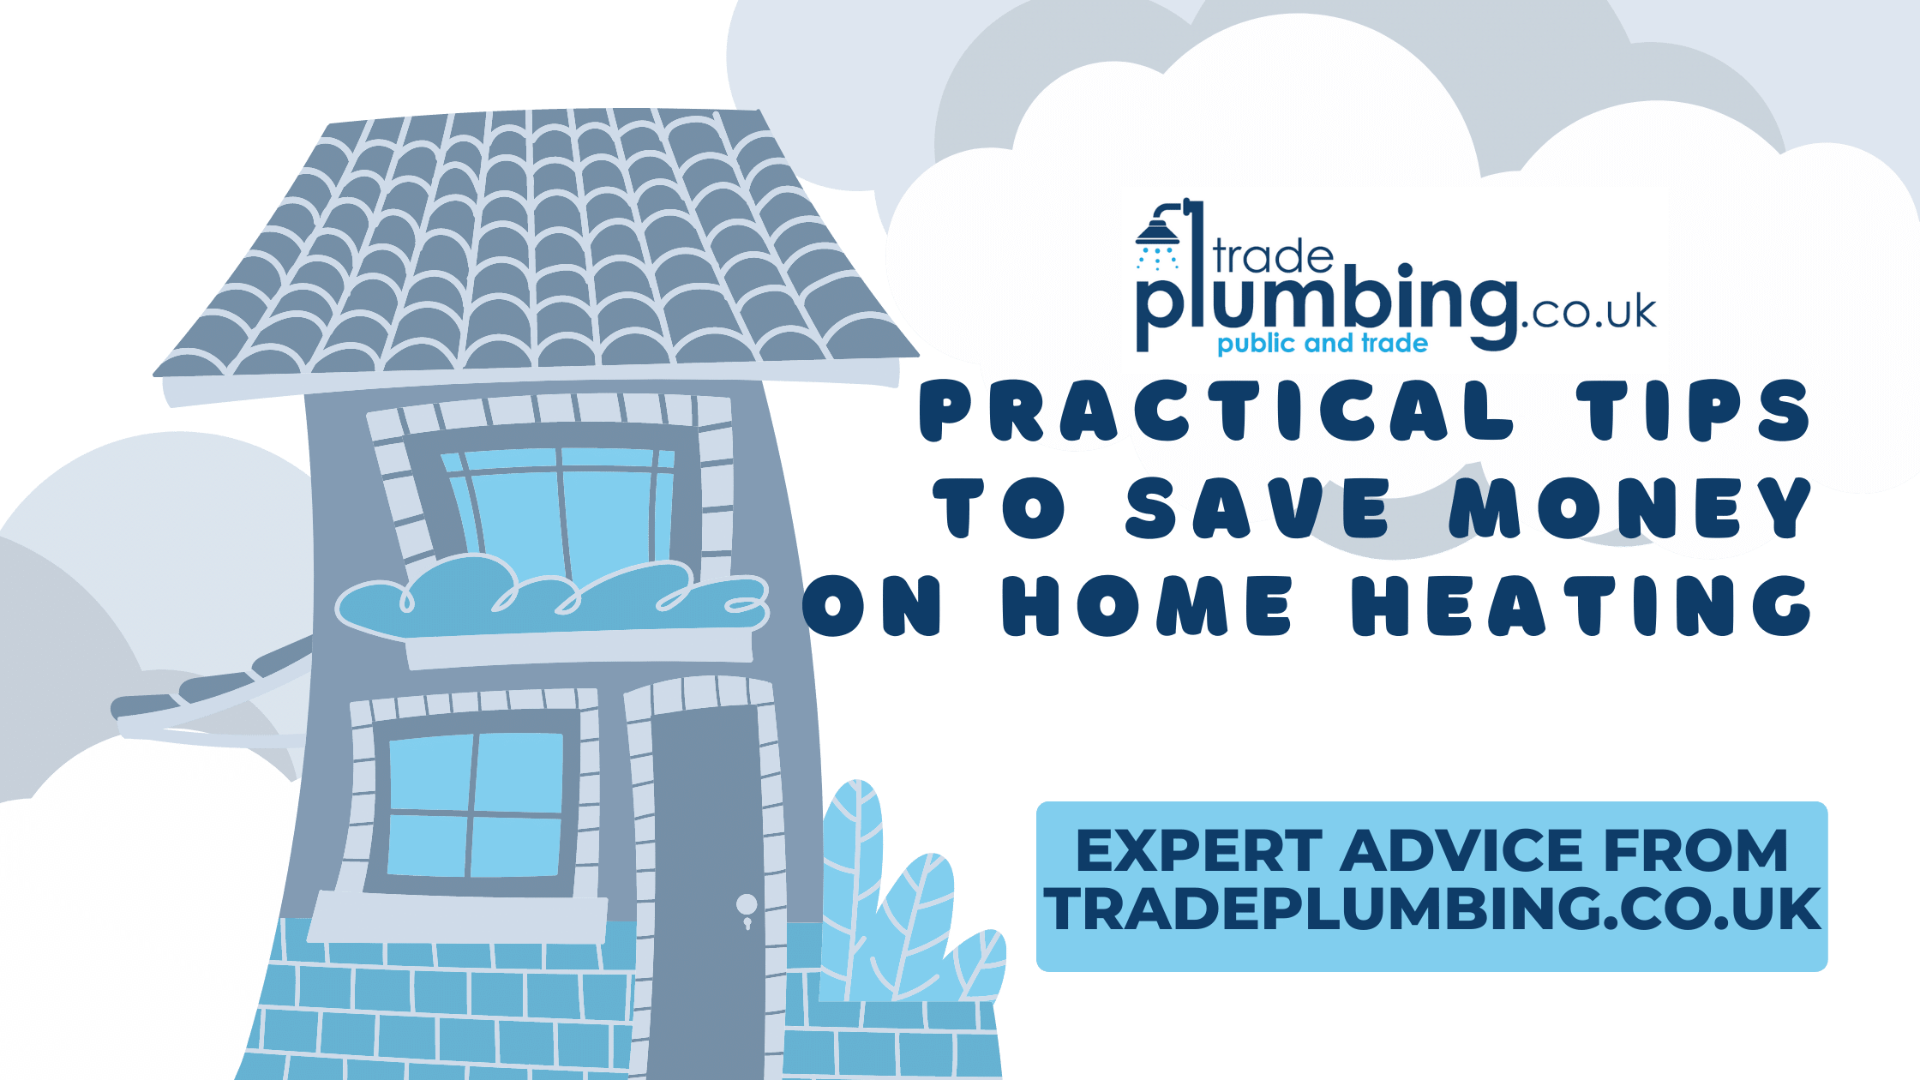 Practical Tips to Save Money on Home Heating: Expert Advice from TradePlumbing.co.uk